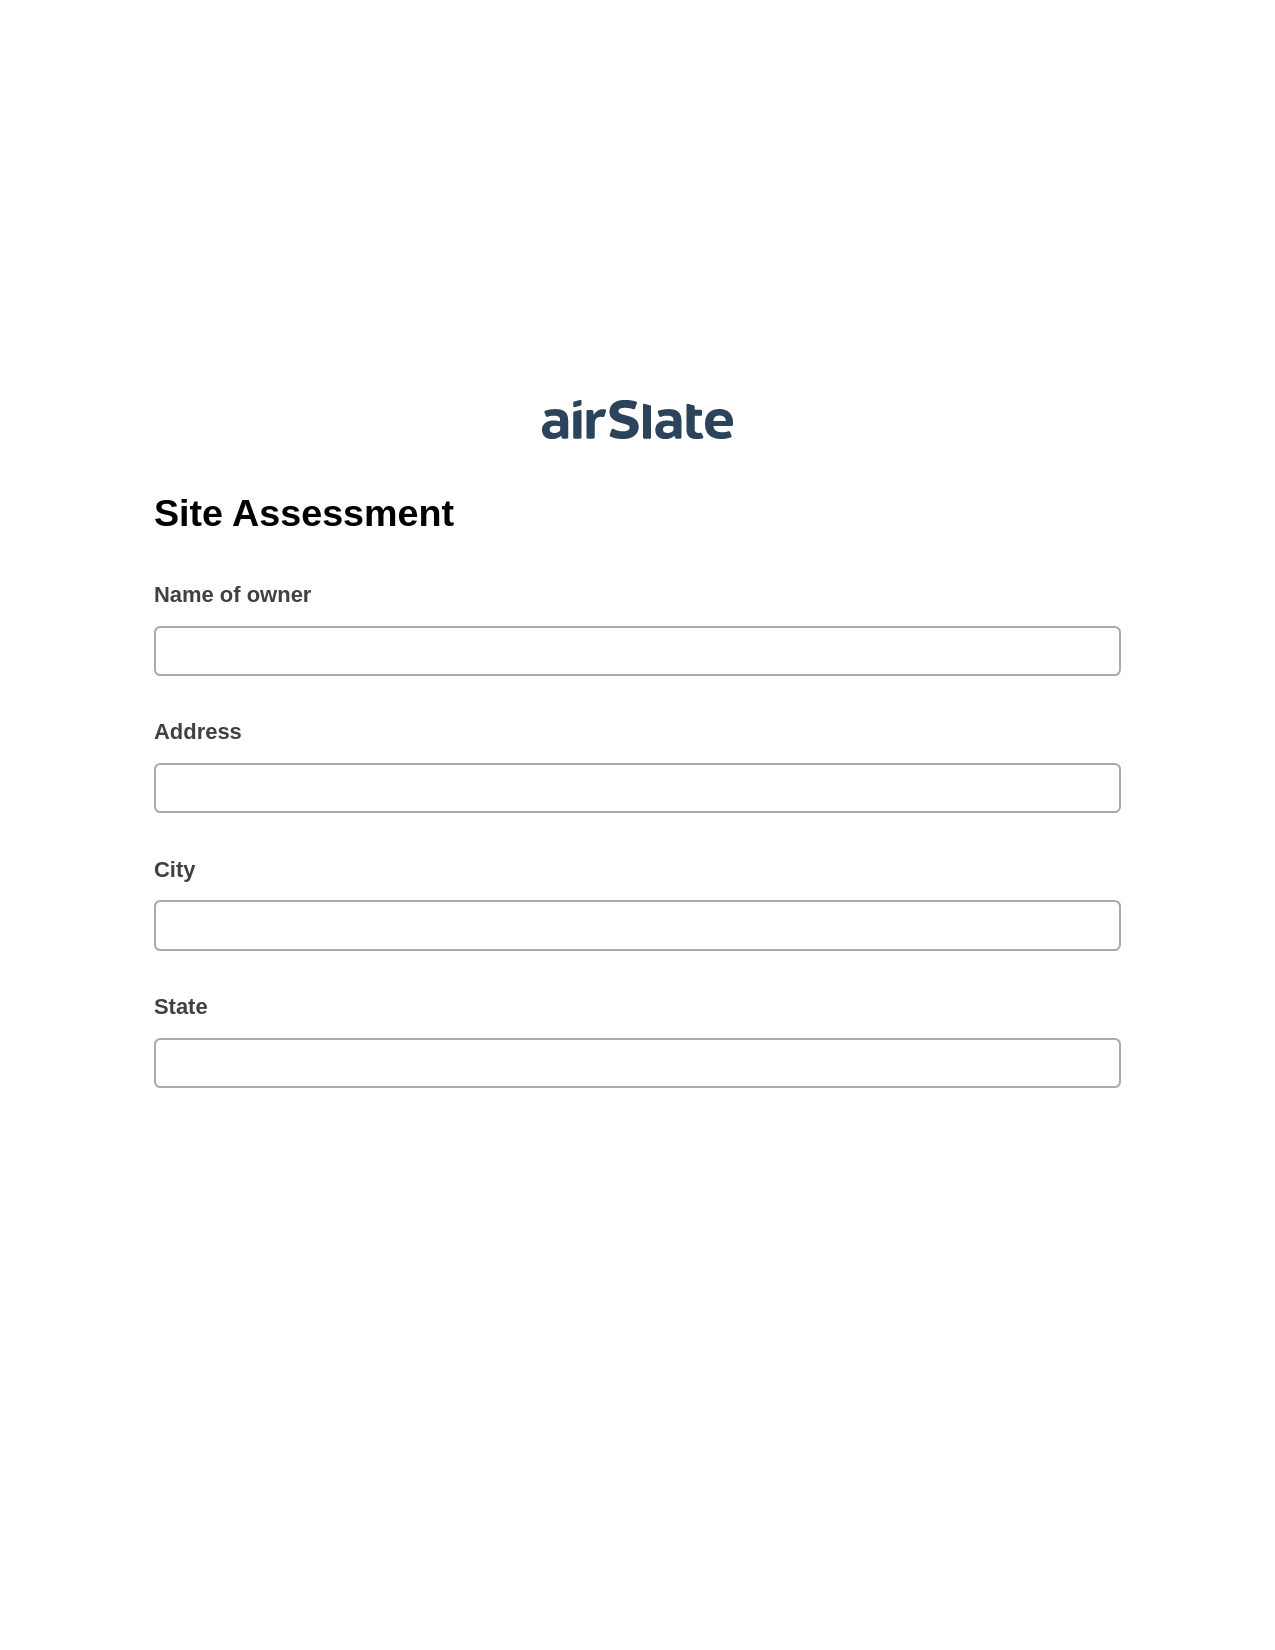 Site Assessment Pre-fill from Excel Spreadsheet Dropdown Options Bot, Lock the slate bot, Export to Excel 365 Bot